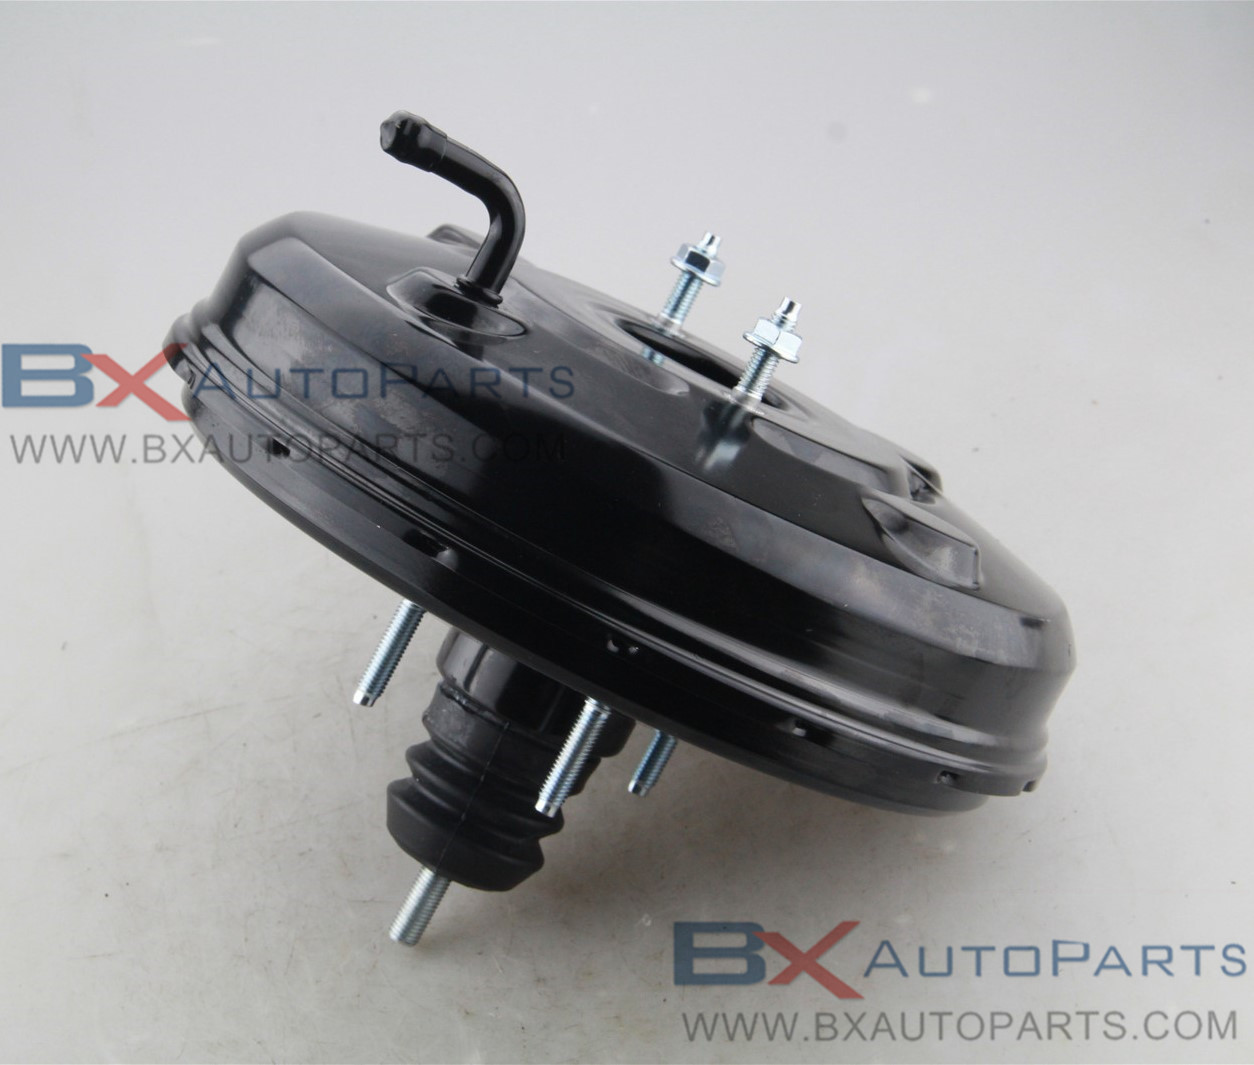 BRAKE BOOSTER FOR HYUNDAI ACCENT 2000-20005